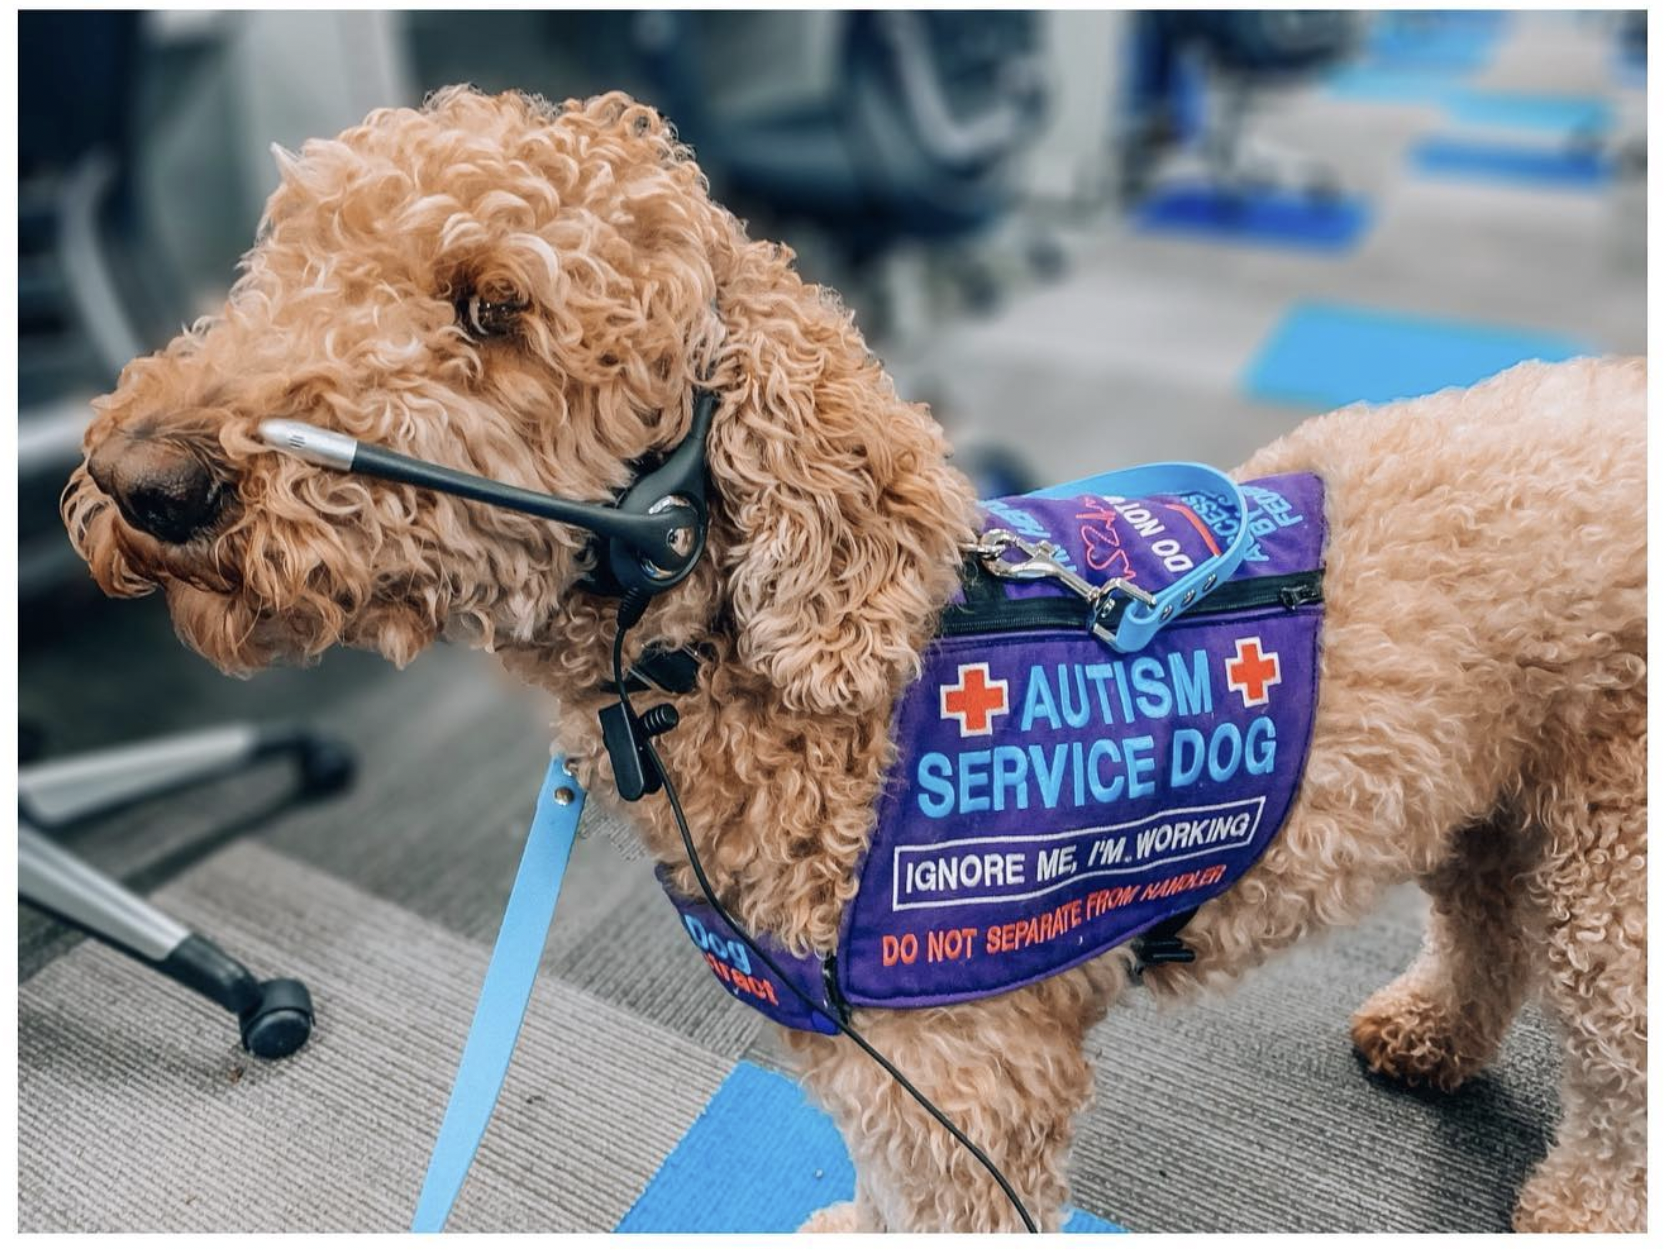 Welcome to the Service Dogs!